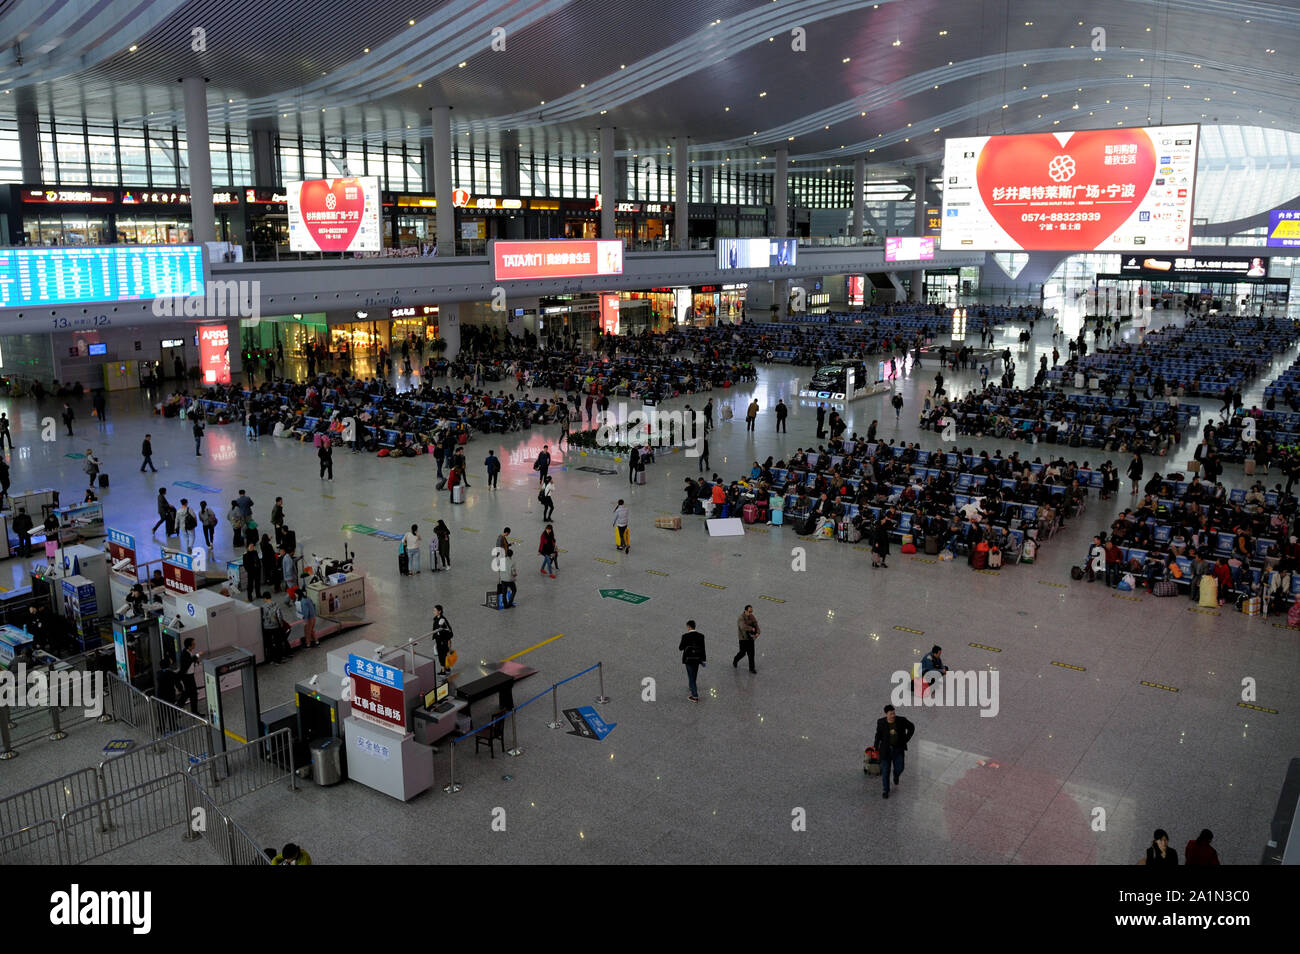 Save and well organized - the rail station in Ningbo, China. Stock Photo